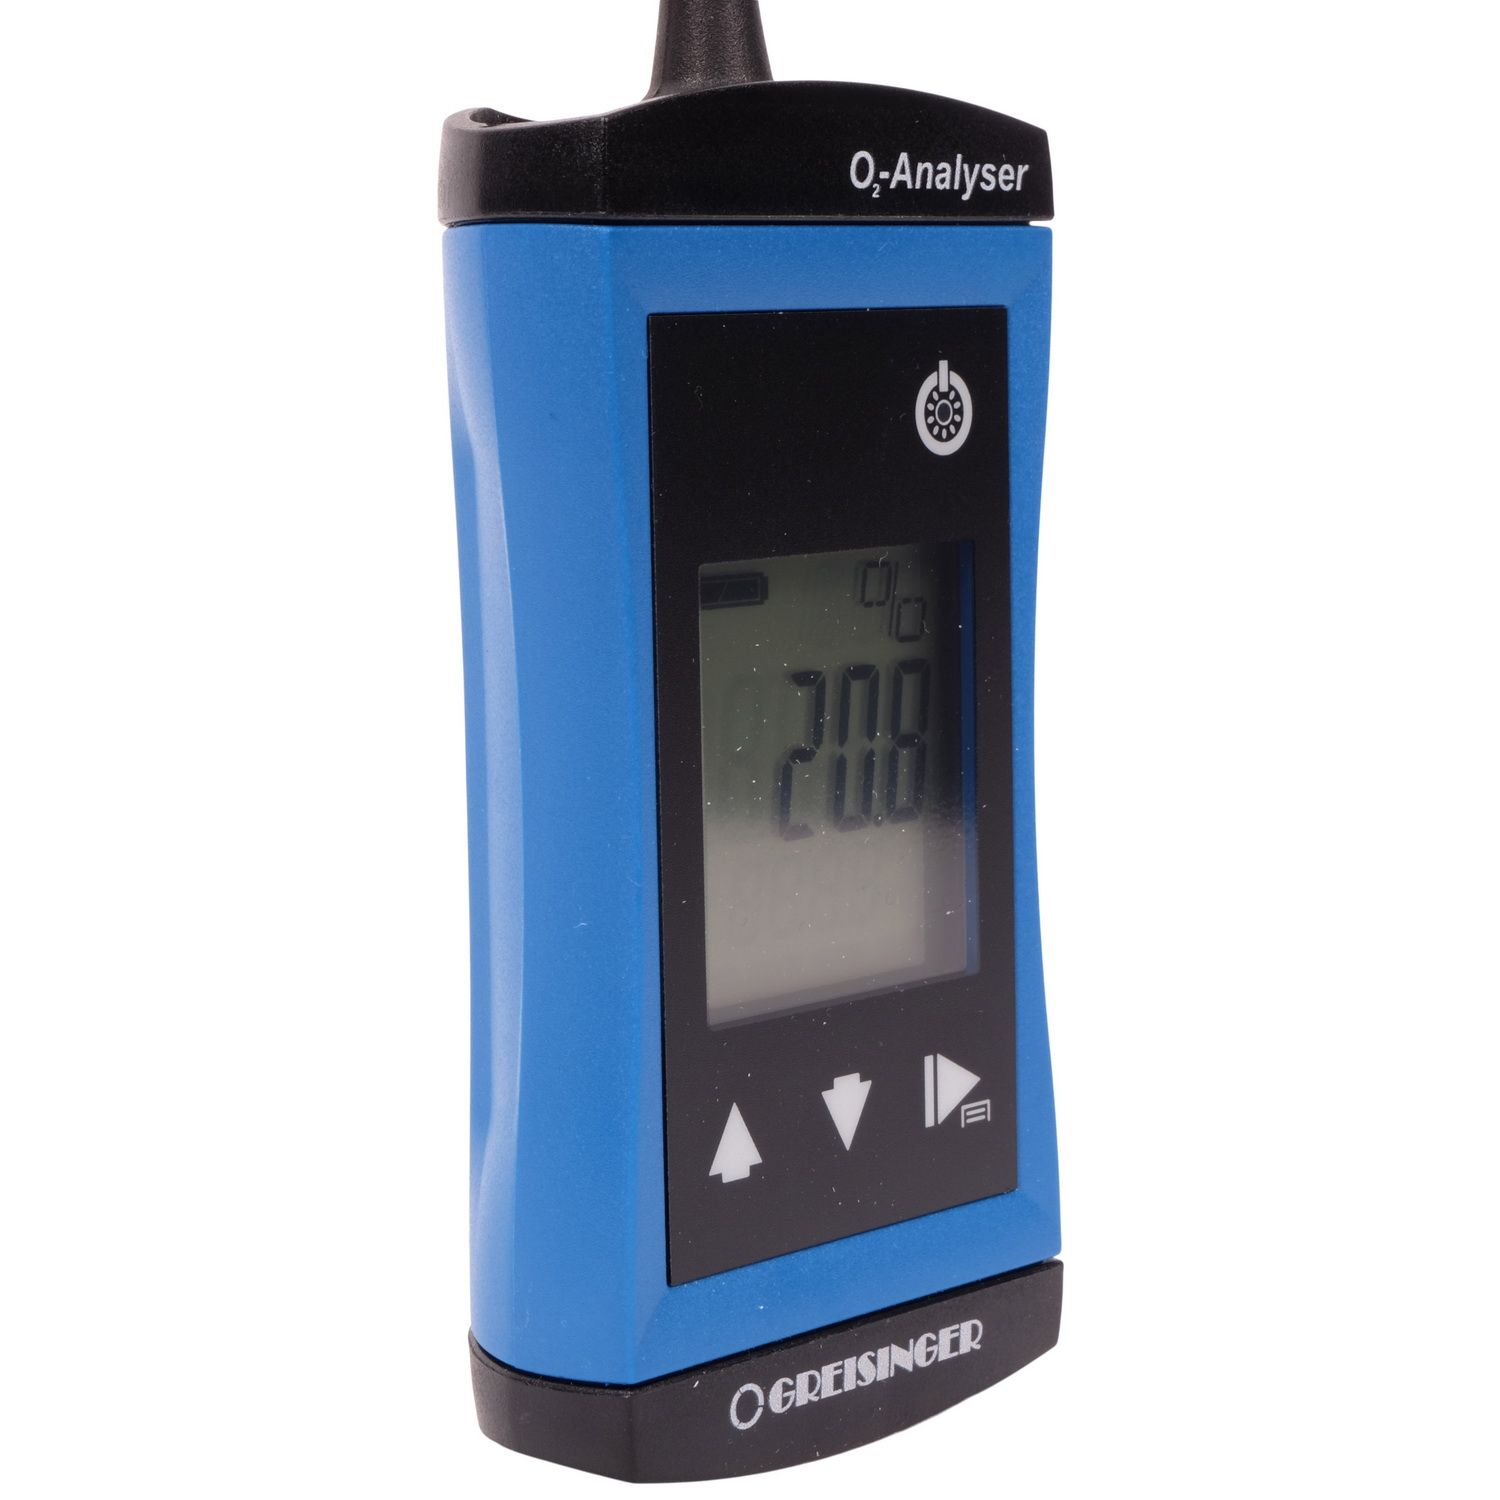 Oxymeter G 1690-MAX-CAN 